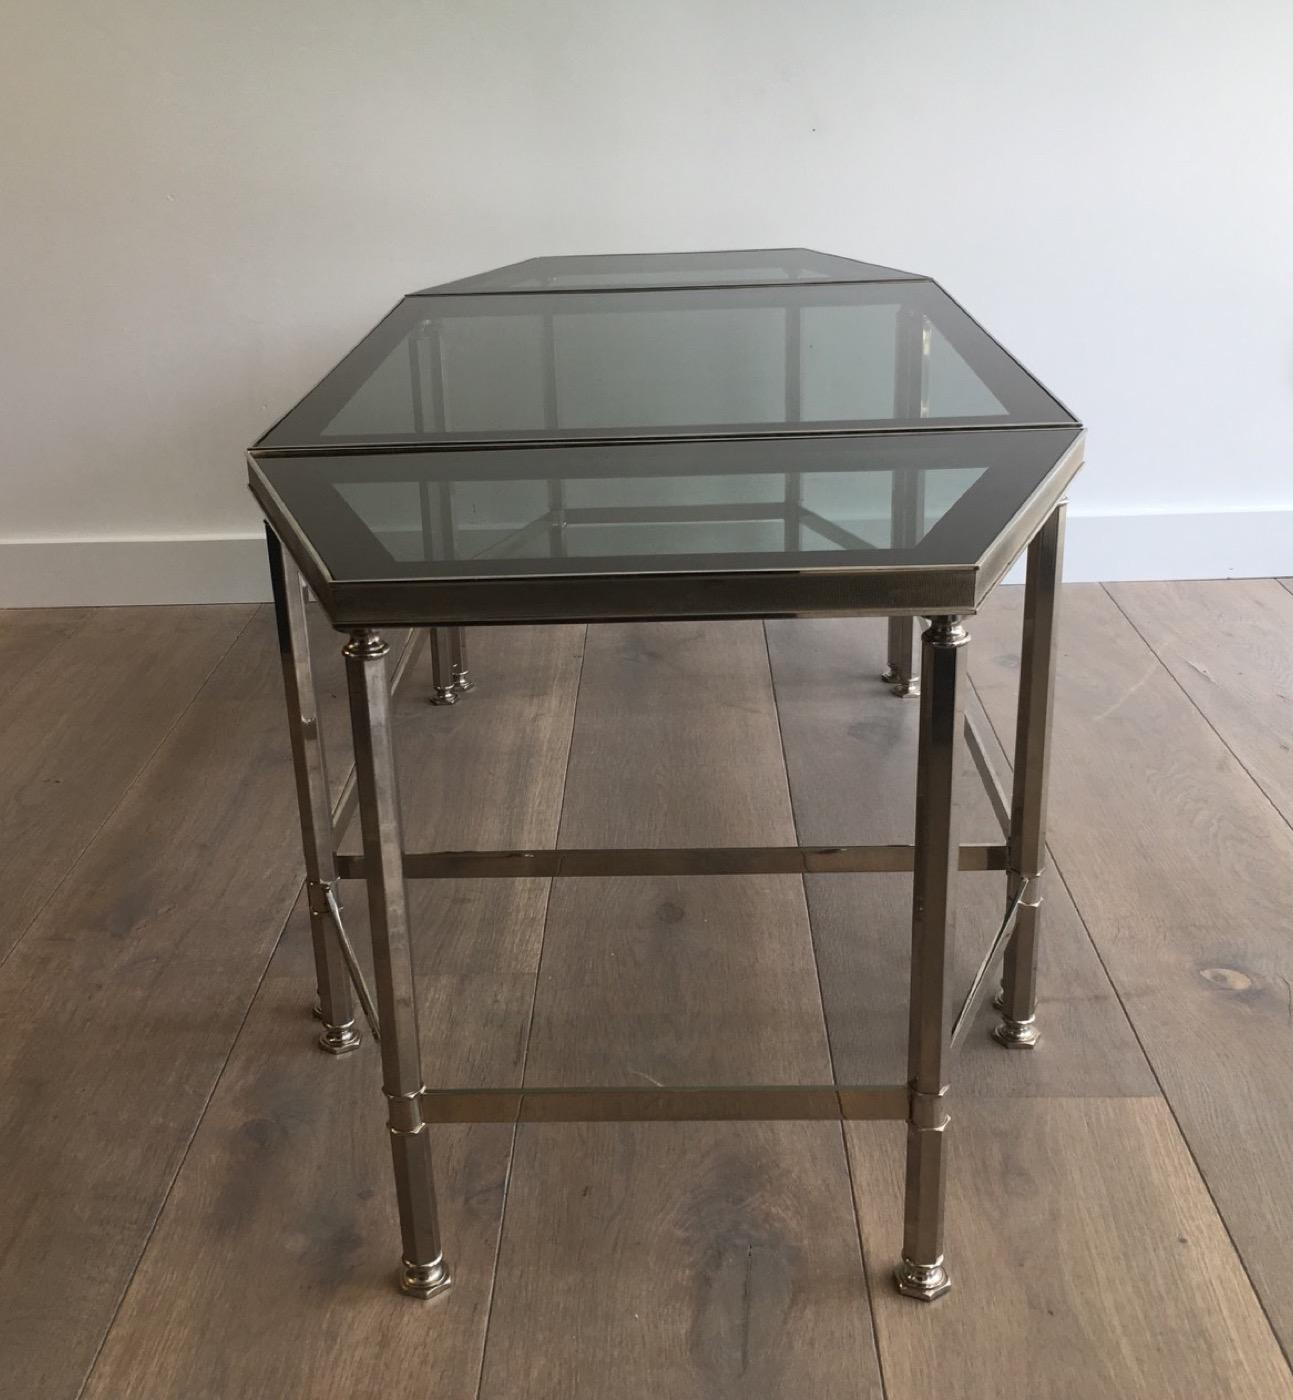 Rare Nickeled Tripartite Coffee Table with Glass Tops Lacquered All Around For Sale 12